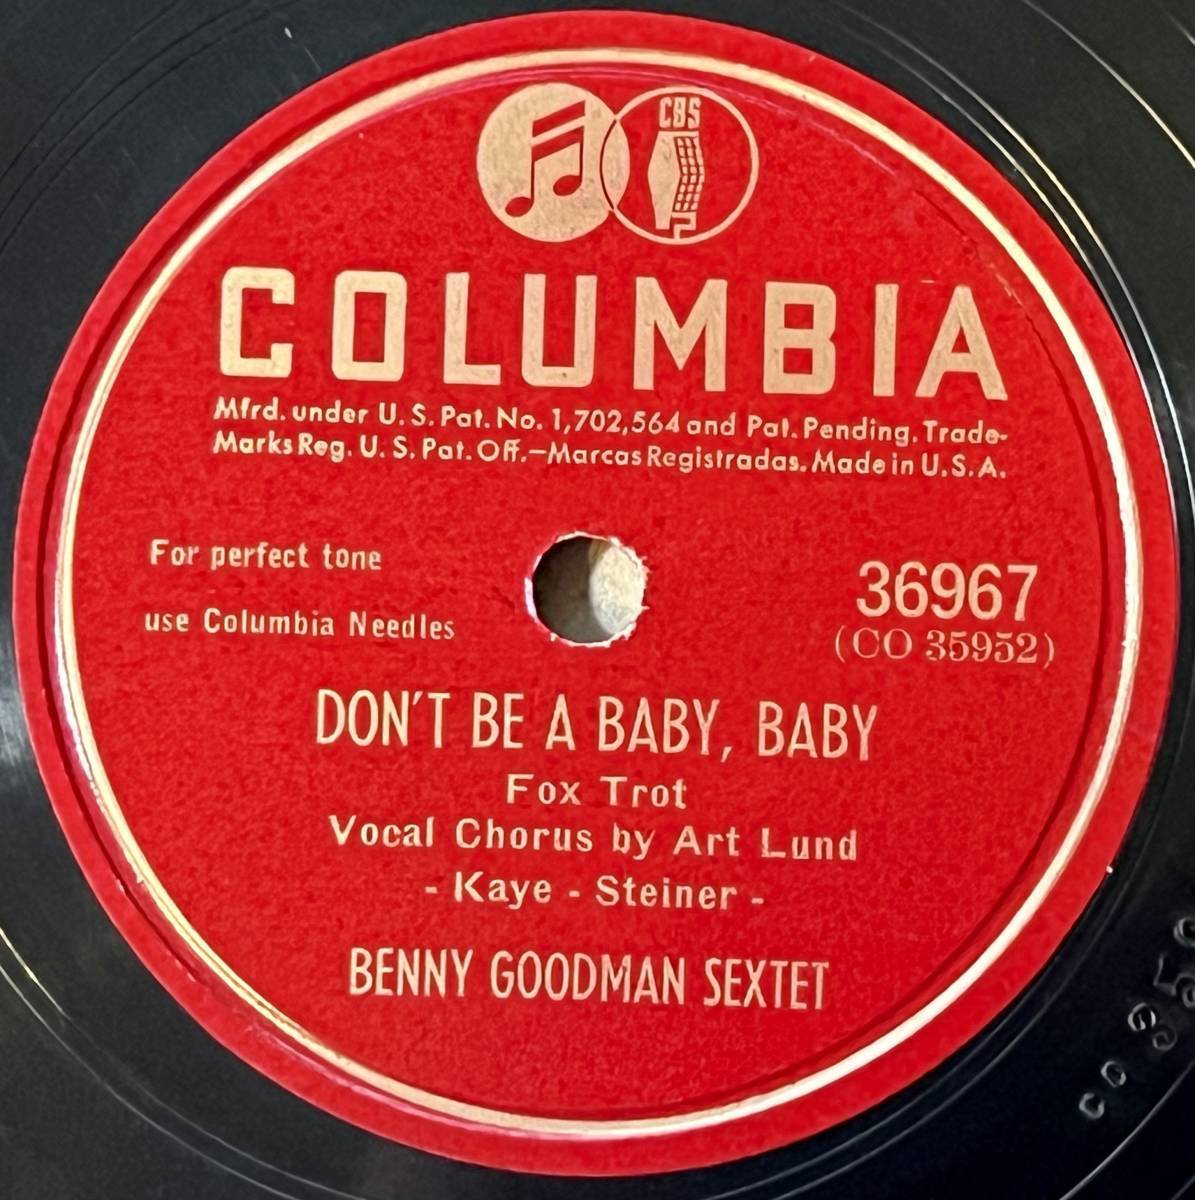 BENNY GOODMAN AND HIS ORCH. COLUMBIA All the Cats Join In/ (Sextet) Don*t Be A Baby, Baby